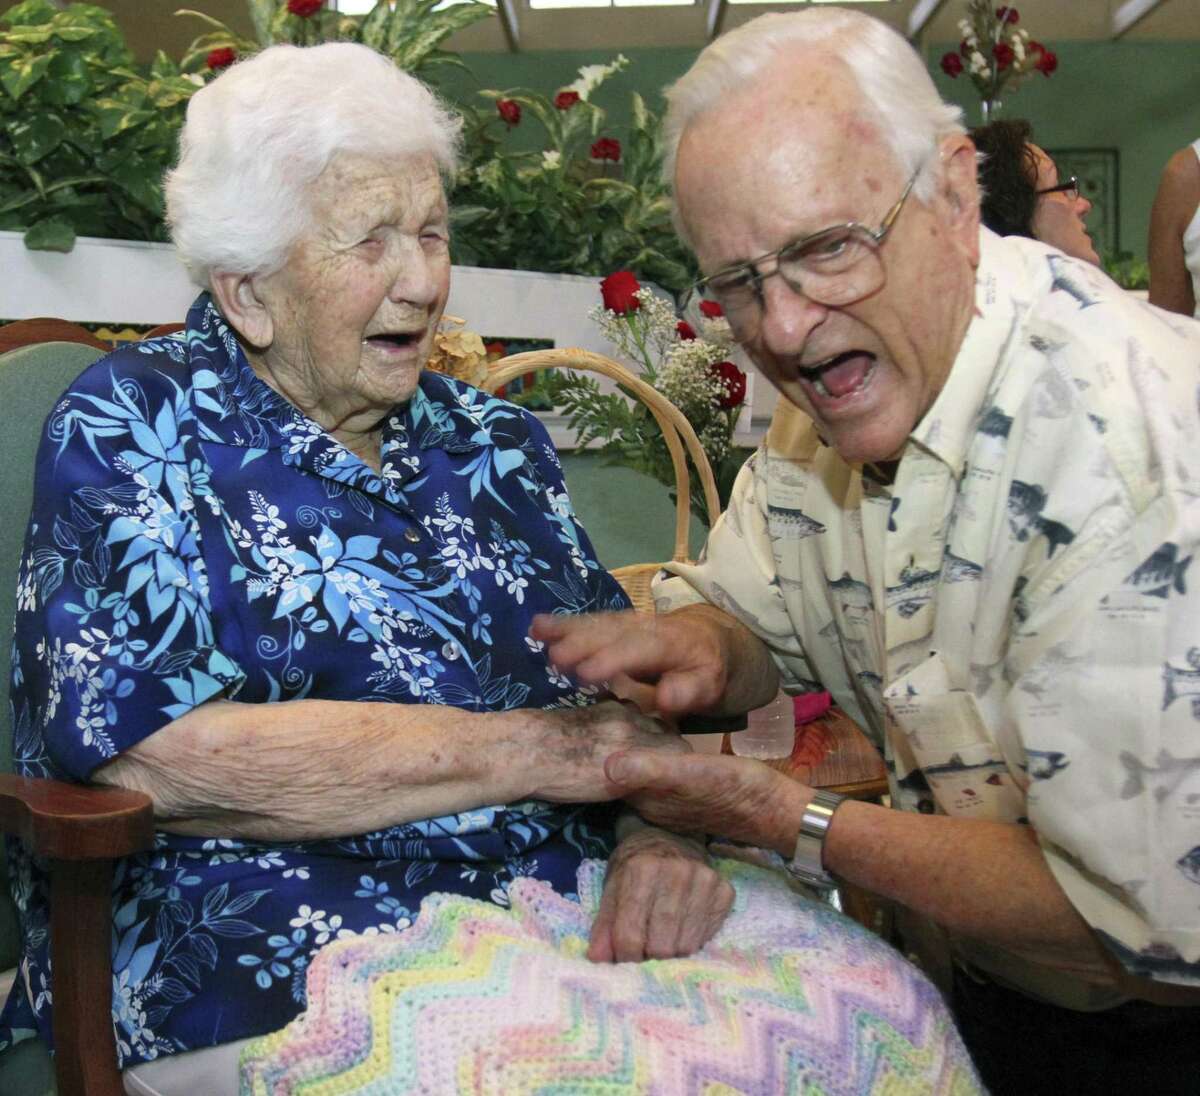 In this Sept. 3, 2010 photo, Onie Ponder, left, laughs with her nephew Dick Chazal during her 112th birthday party at Emeritus at Ocala East in Ocala, Fla. Onie Ponder died early Friday, Dec. 31, 2010. According to the Gerontology Research Group, Ponder had been the oldest person in Florida and one of the 25 oldest people in the world. (AP Photo/Ocala Star-Banner, Bruce Ackerman)